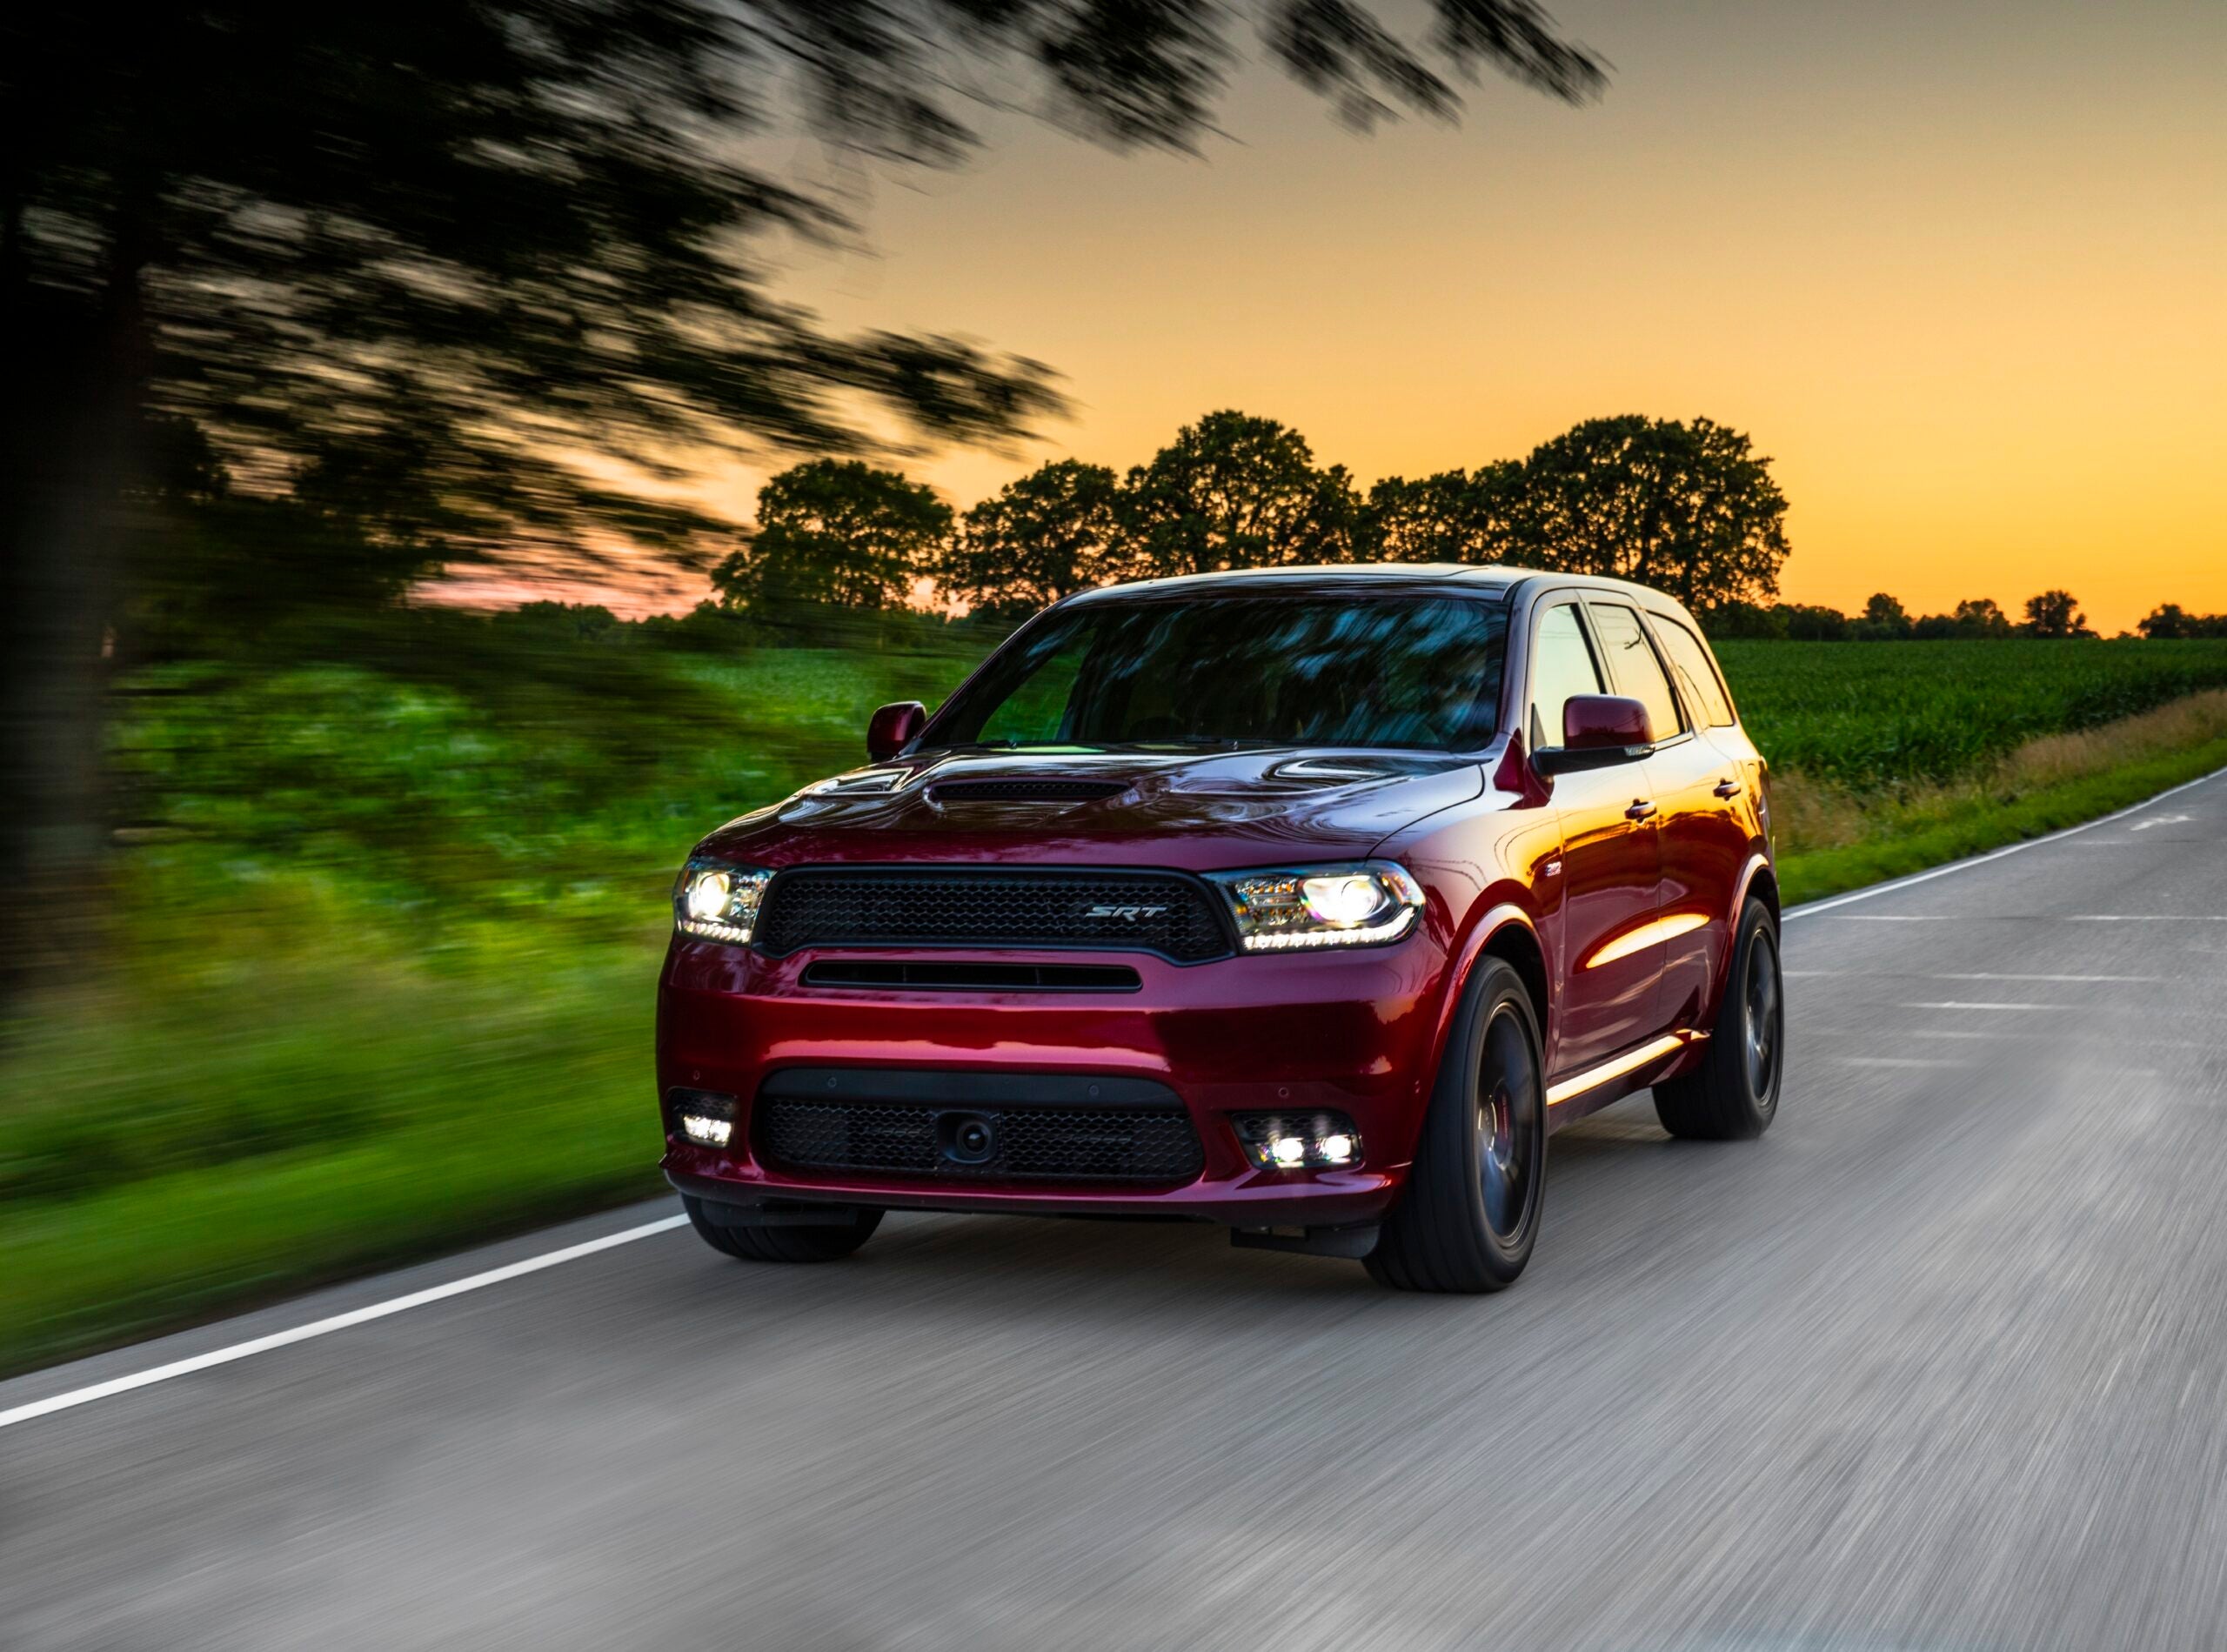 The 2020 Dodge Durango SRT is a family car with powerful performance